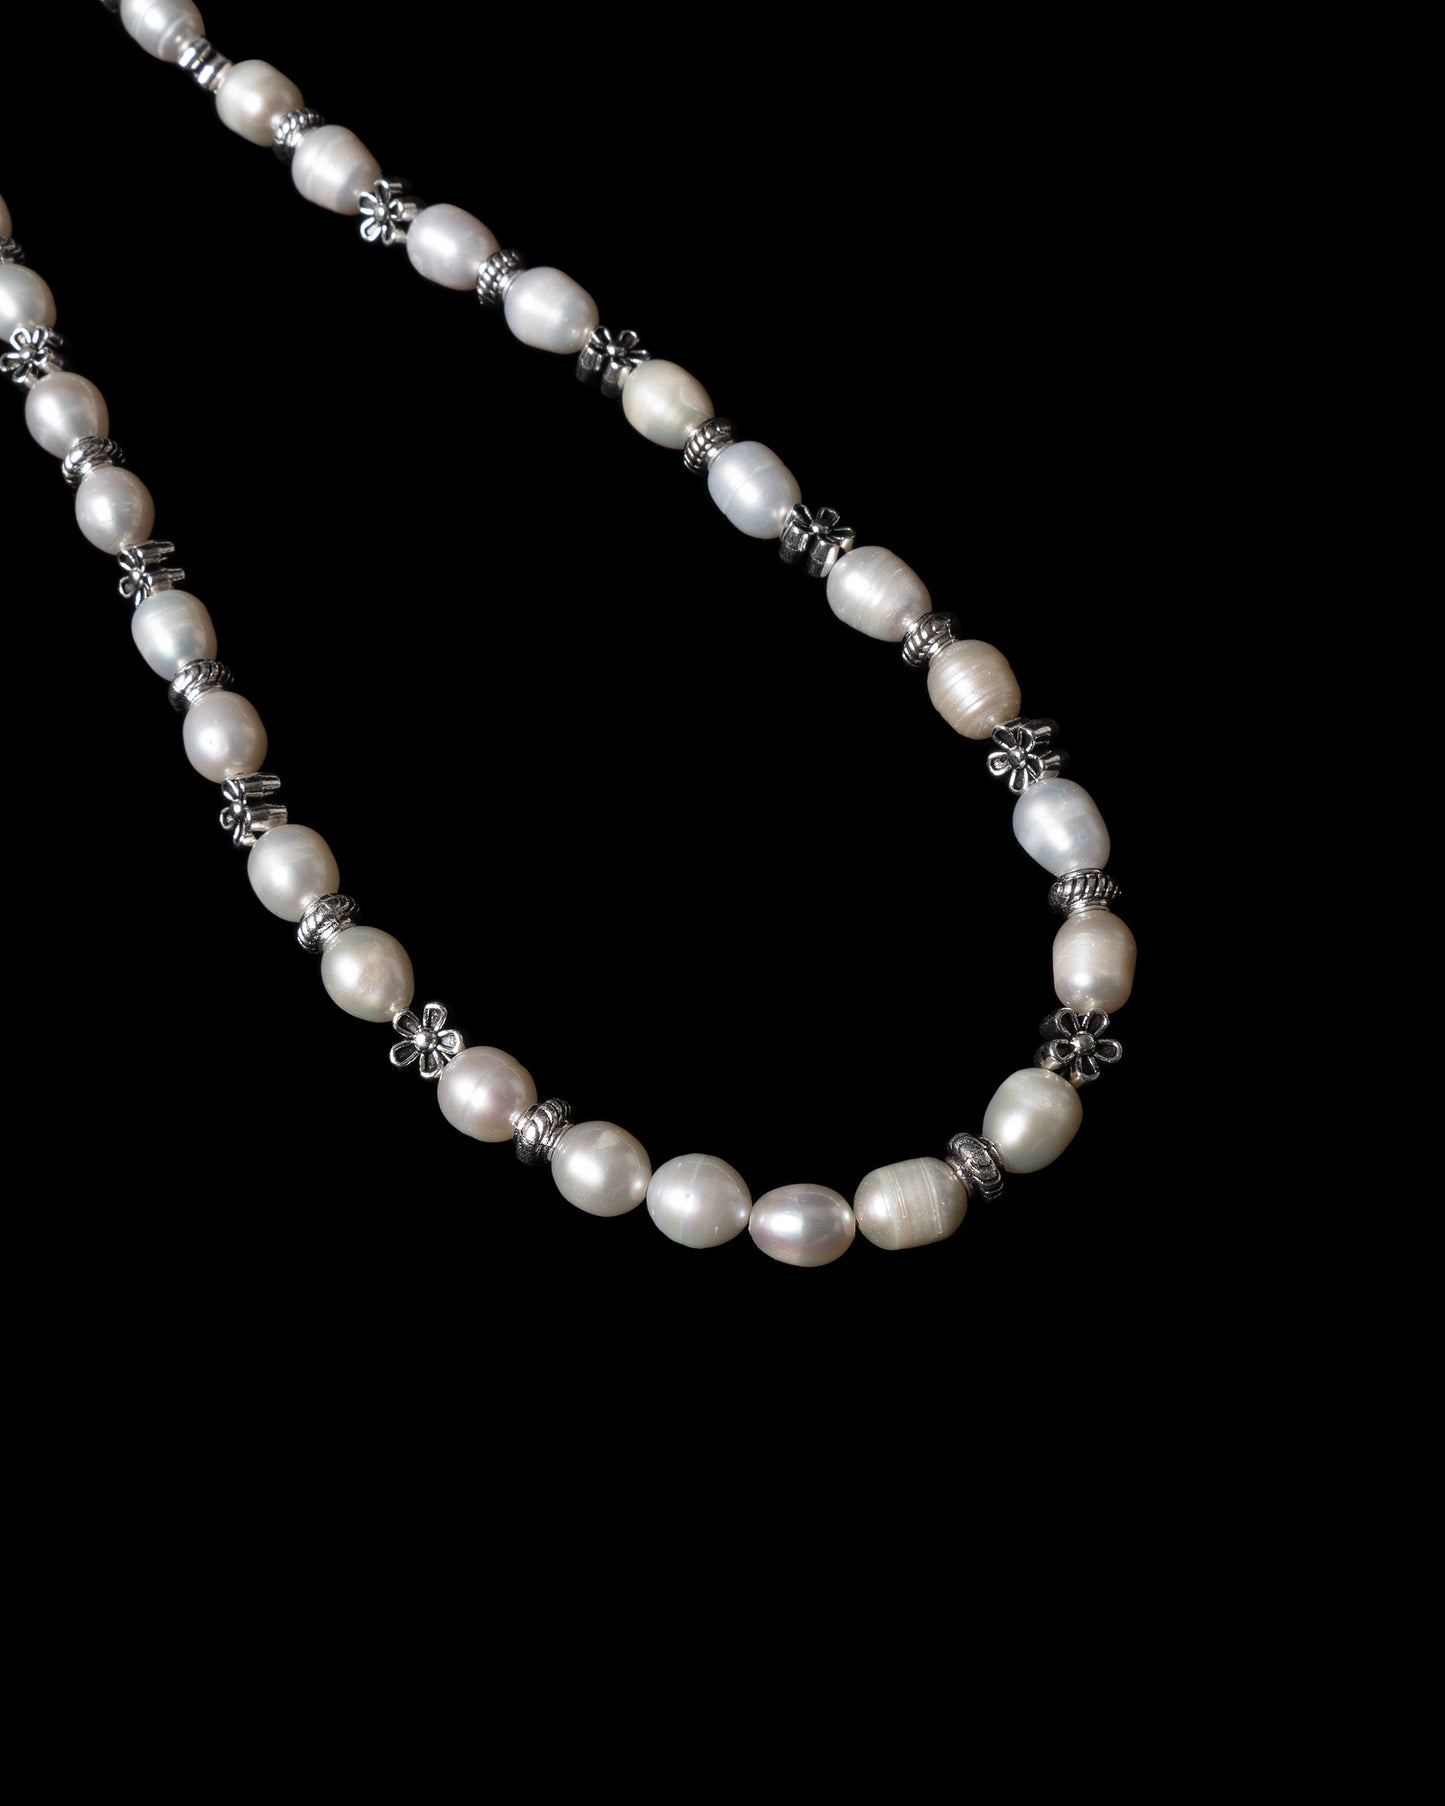 Flower pearl necklace